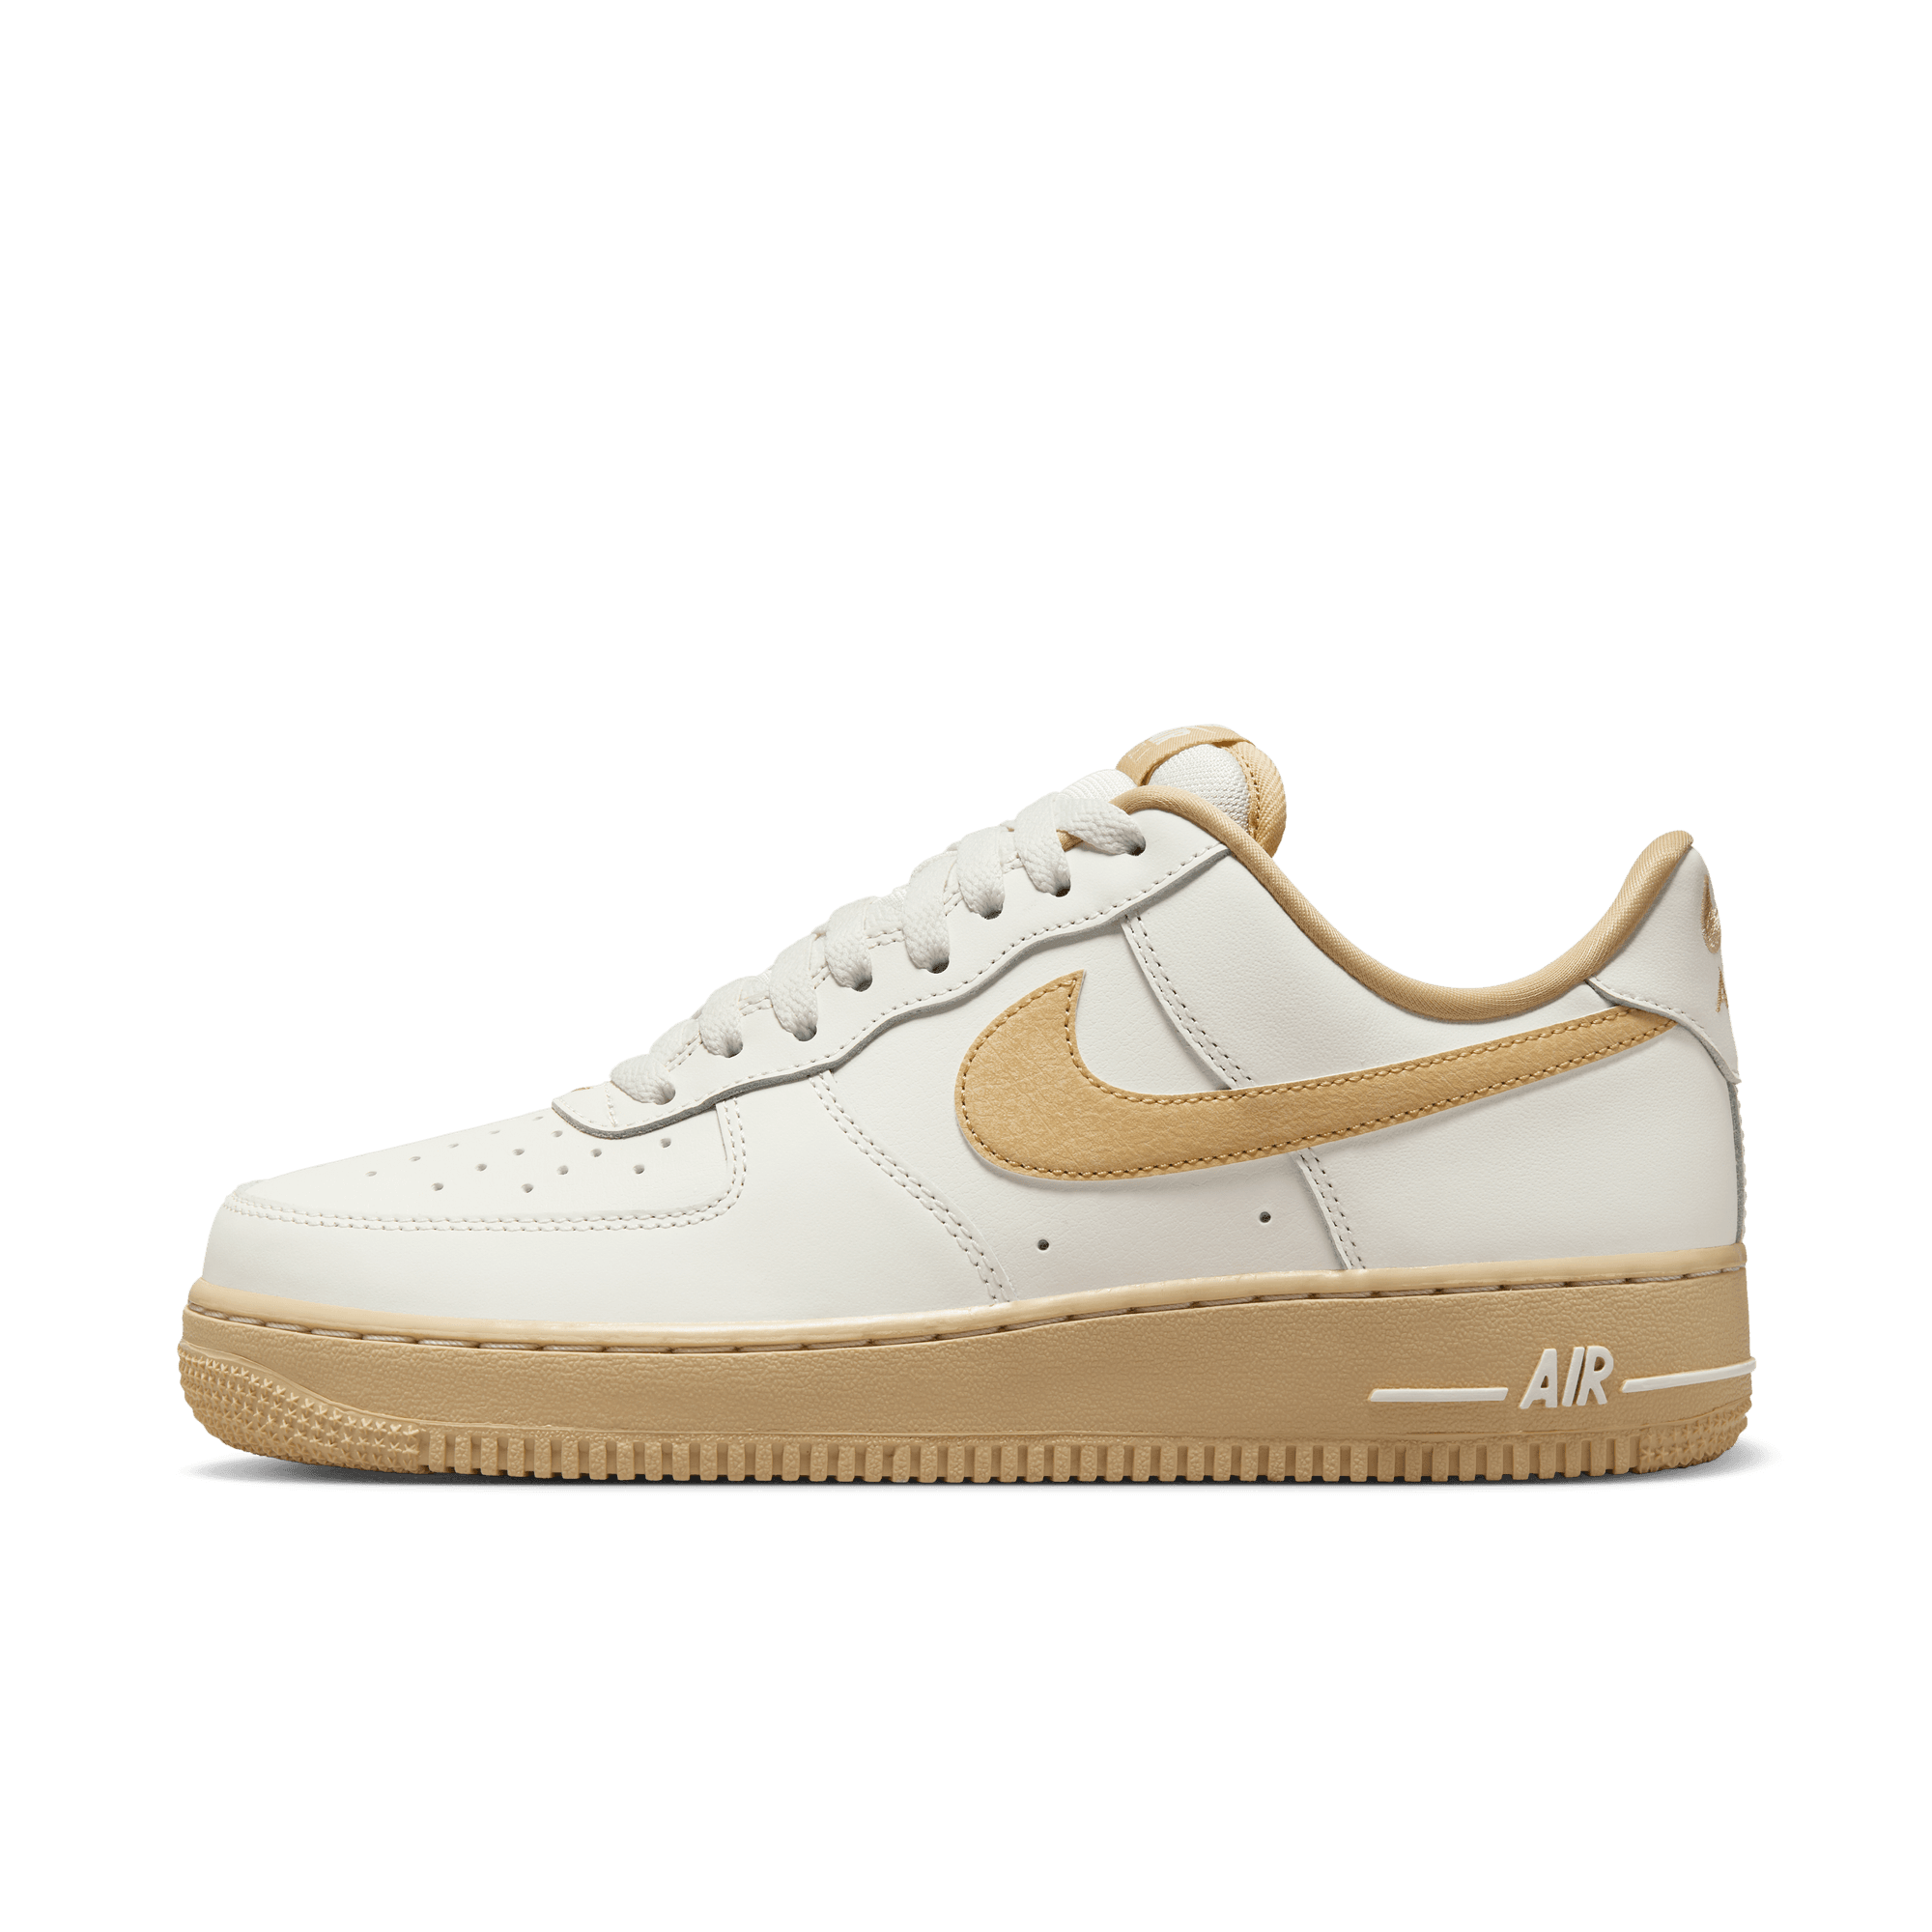 NIKE AIR FORCE 1 ’07 WOMEN'S SHOES